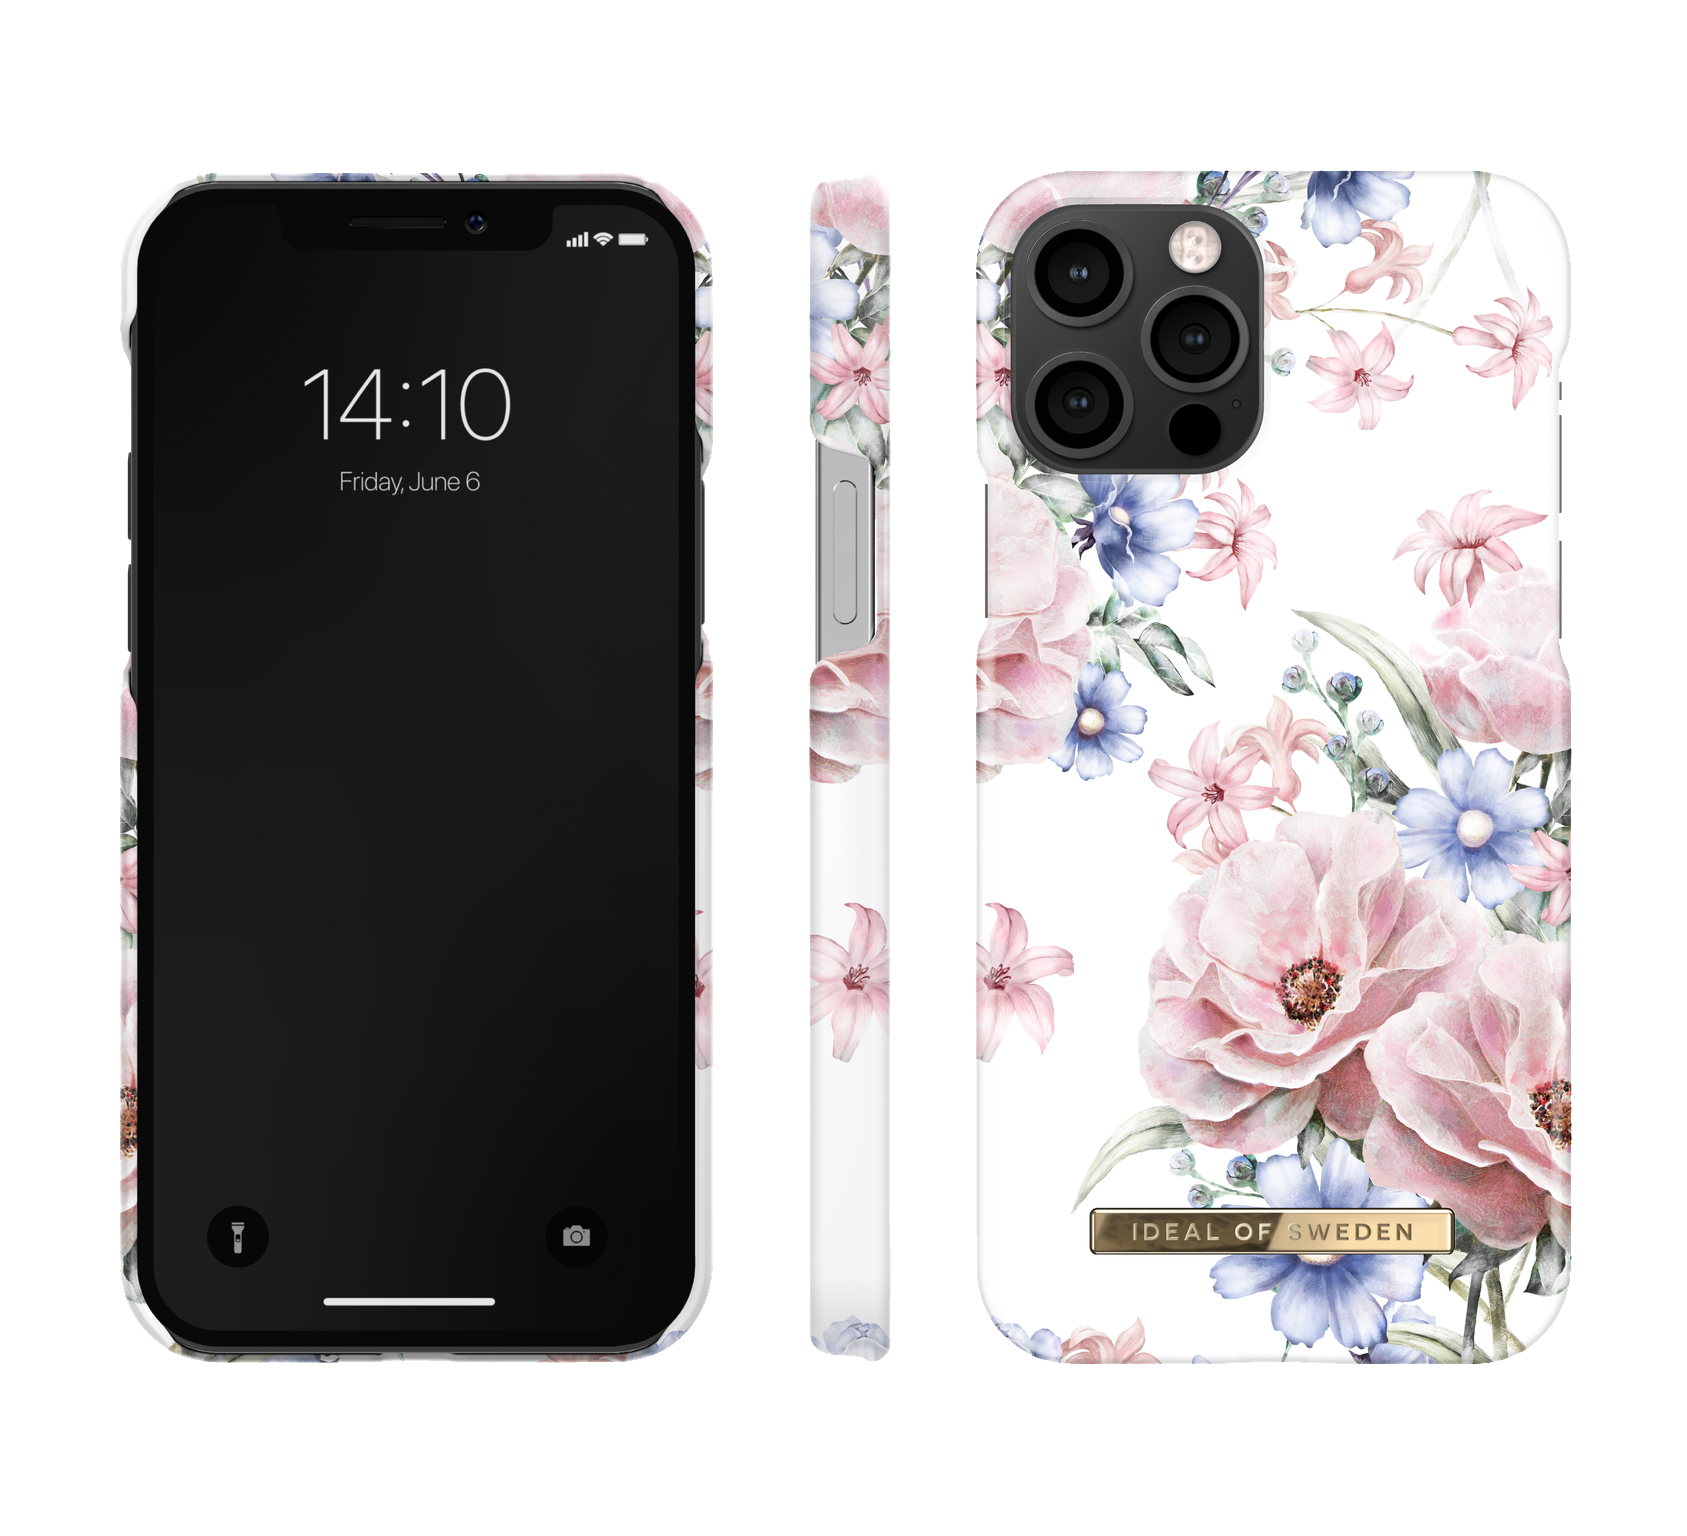 SWEDEN Case, 12, Pro, OF Romance Apple, Floral IDEAL Backcover, iPhone Fashion iPhone 12